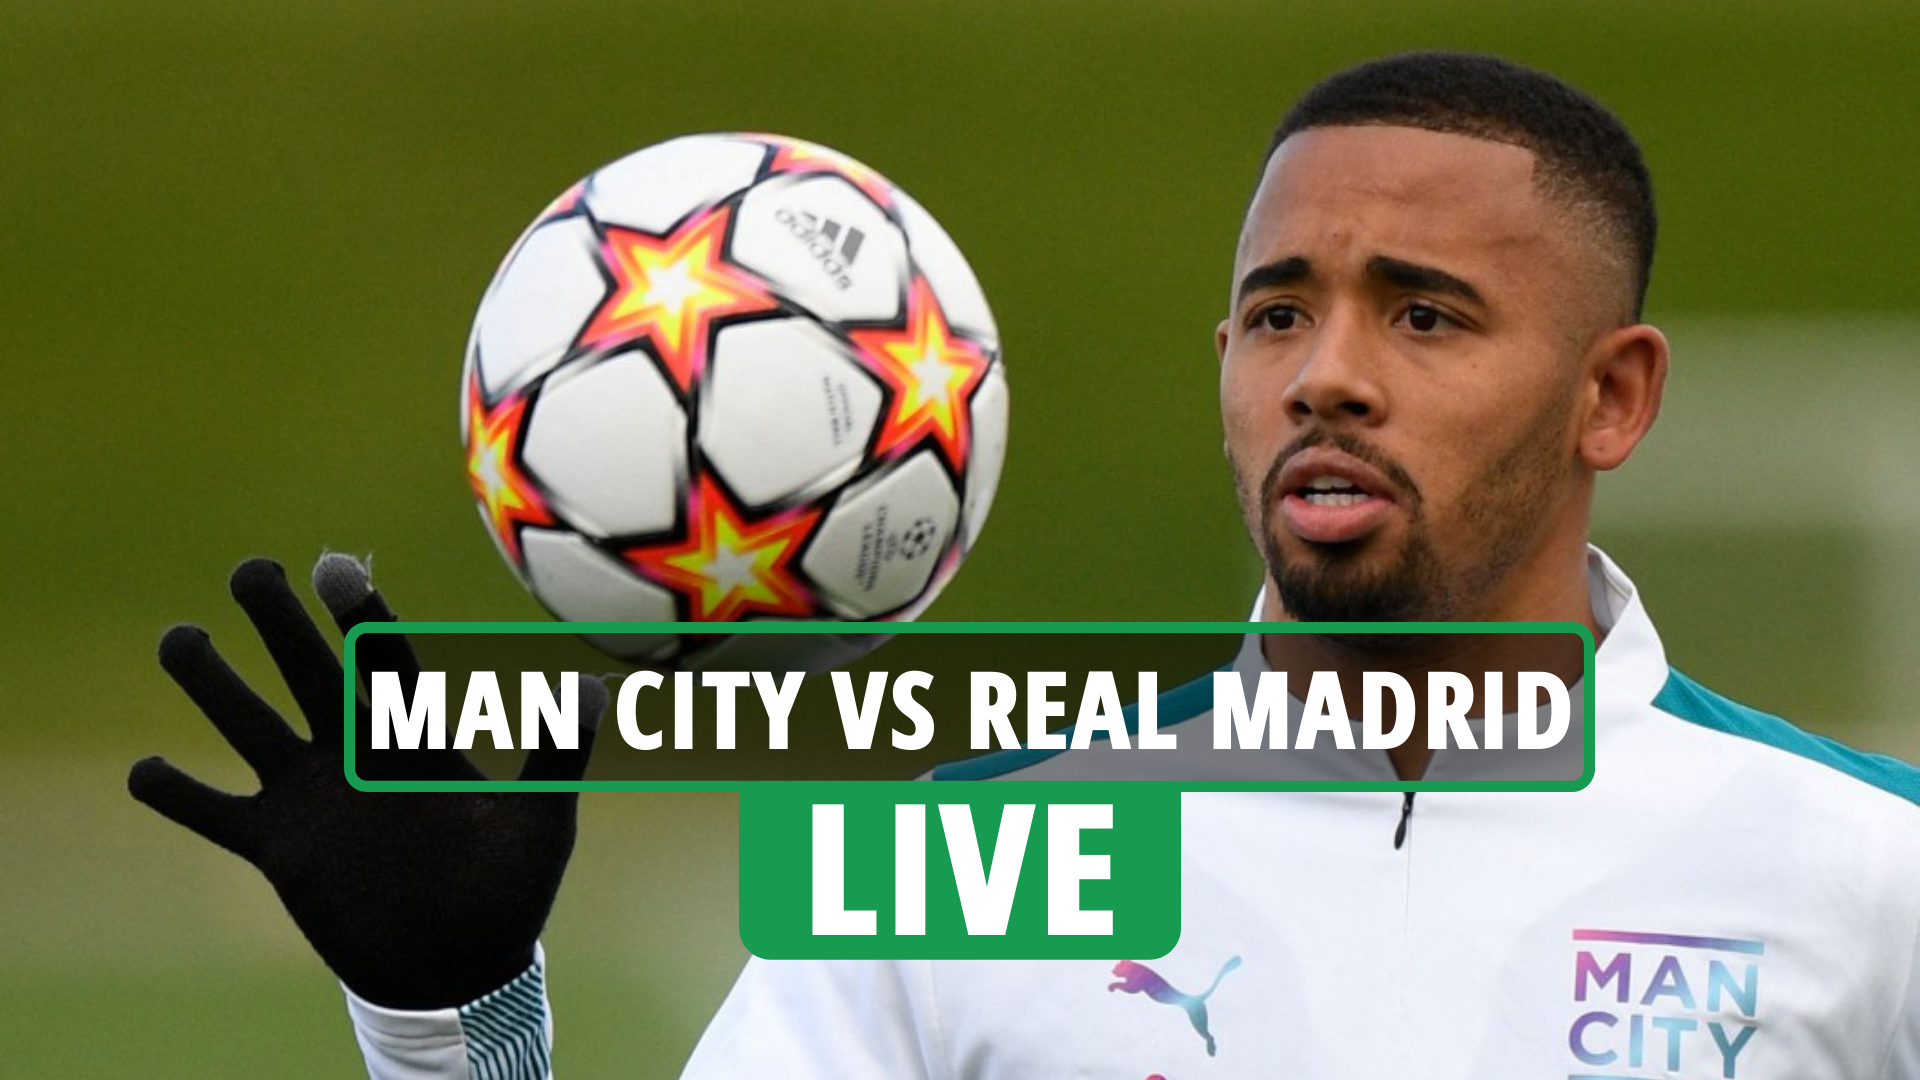 Man City vs Real Madrid: TV channel, live stream, kick-off time and team news